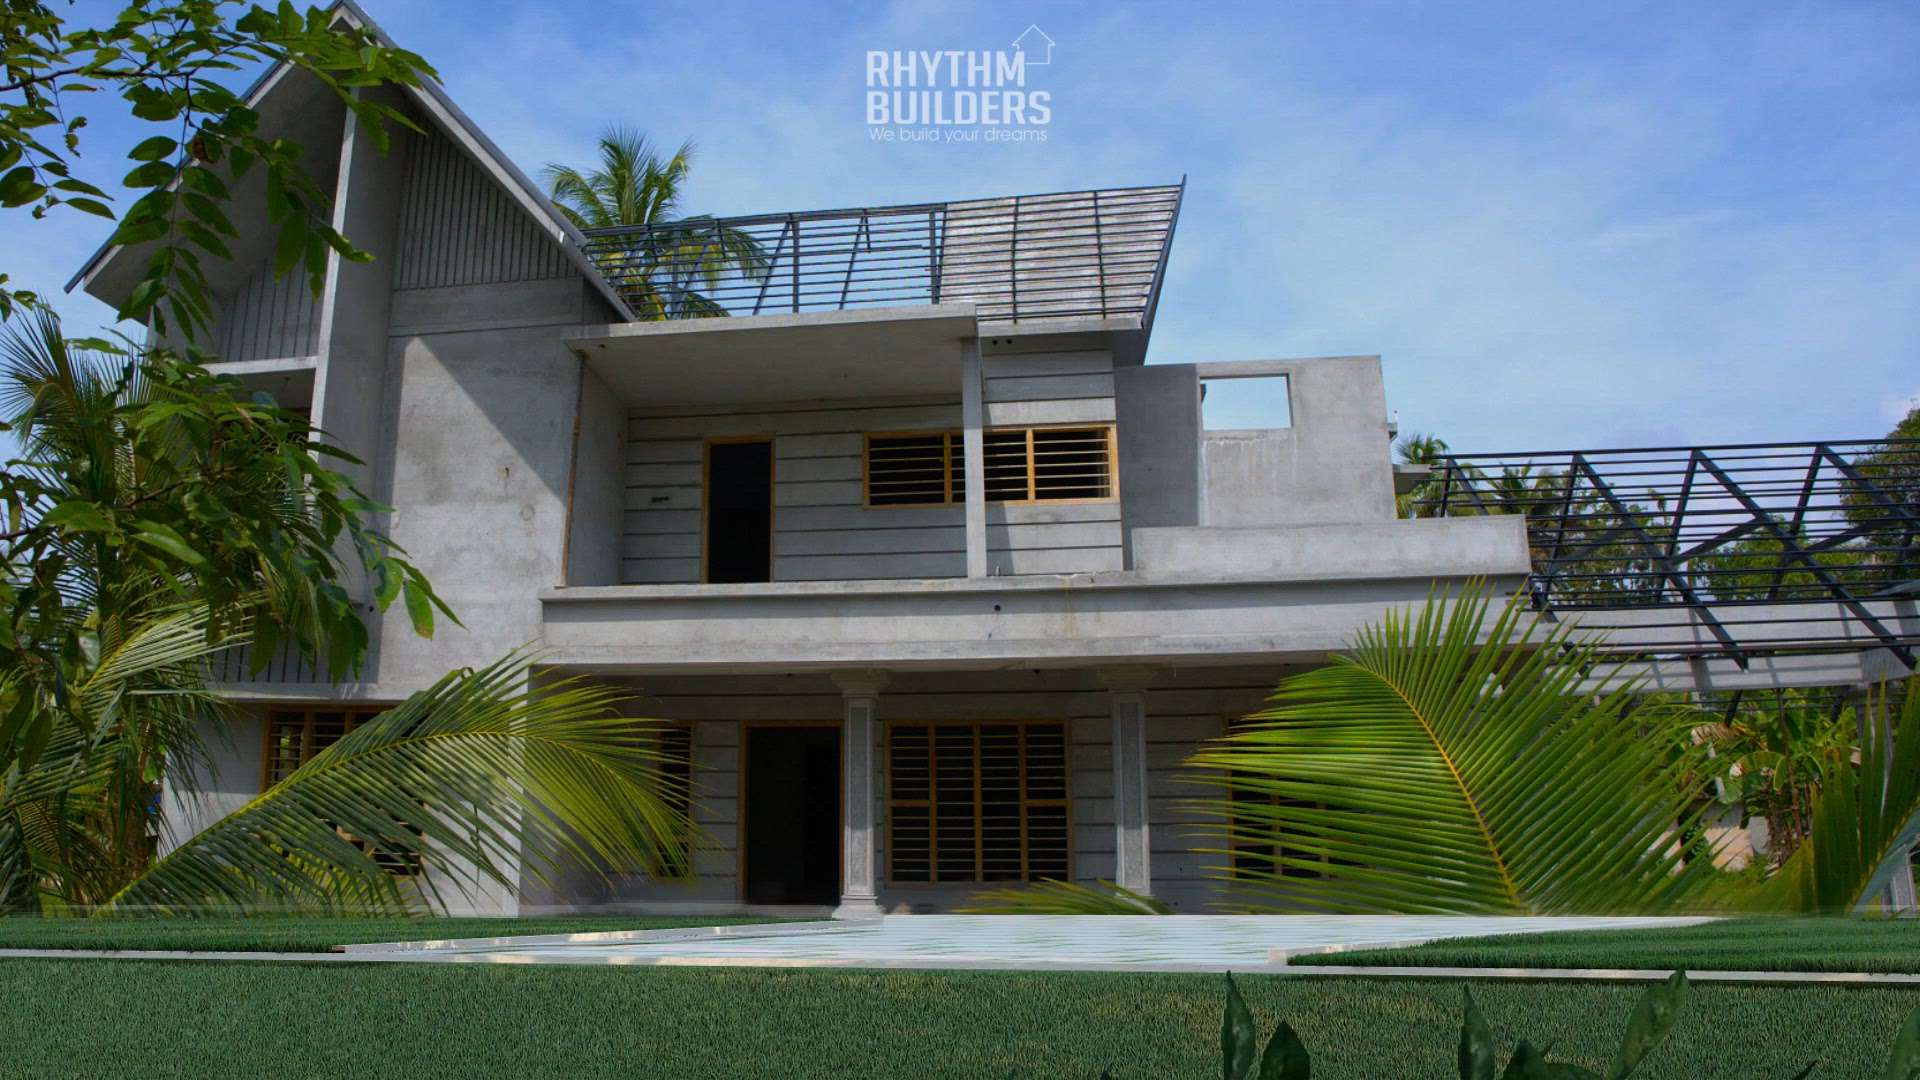 #ultramodern  #besthome  #bestprice  #modernhouses  #creative  #HouseDesigns  #ElevationHome  #new_home  #Alappuzha  #lowbudgethousekerala  #MixedRoofHouse  #KeralaStyleHouse  #keralaart  #newhomeconstruction#patio  #patiodecor  #lowbudget #lowbudgethousekerala  #bestprice  #Best_designers #BestBuildersInKerala #creative  #newhomeconstruction #innovative #LandscapeIdeas  #moderndesign#ultramodern  #besthome  #bestprice  #modernhouses  #creative  #HouseDesigns  #ElevationHome  #new_home  #Alappuzha  #lowbudgethousekerala  #MixedRoofHouse  #KeralaStyleHouse  #keralaart  #newhomeconstruction#lowbudgethousekerala #Kalamassery #bestinteriordesign  #besthome  #naturelove  #modernhome #HouseRenovation #creative#HouseRenovation  #Renovationwork  #SmallBudgetRenovation  #Best_designers  #best_architect  #lowbudget  #Minimalistic  #ContemporaryHouse  #modernhome  #goodvibes  #changeover  #makehome  #newelevations  #attractivehousedesigns  #attractivehousedesigns  #attractivedesign